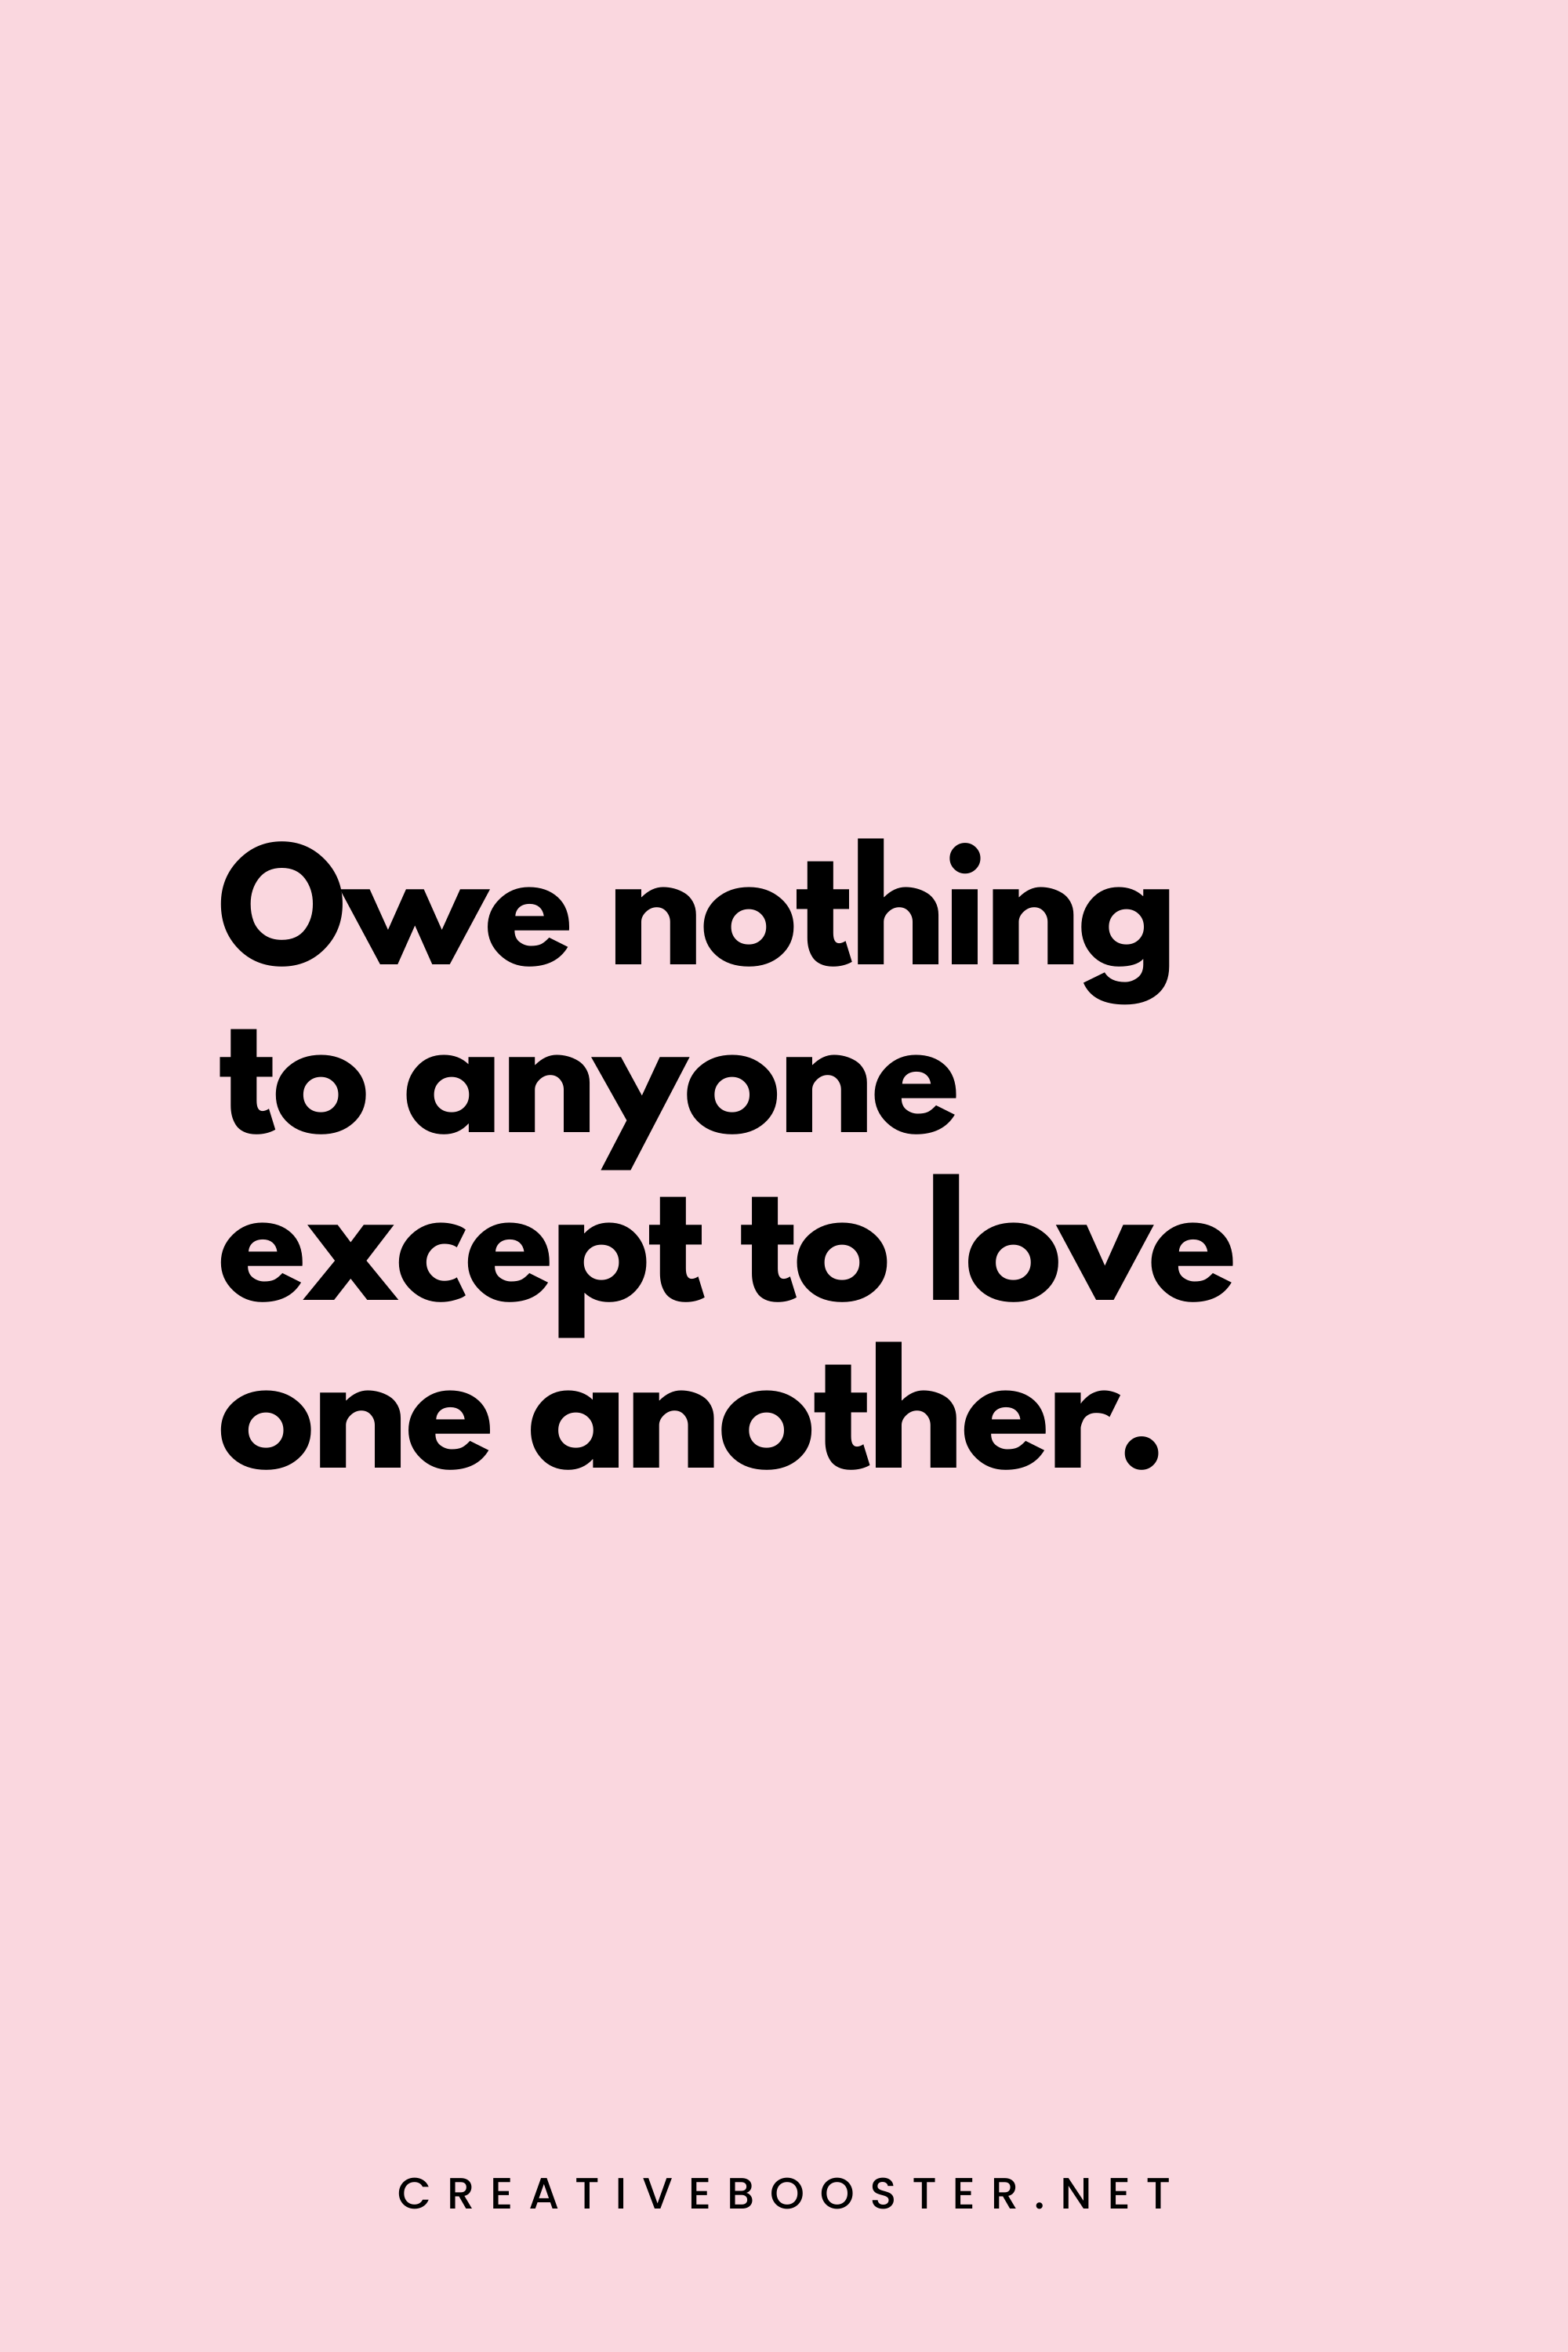 50. Owe nothing to anyone except to love one another. - Romans 13:8 - 5.